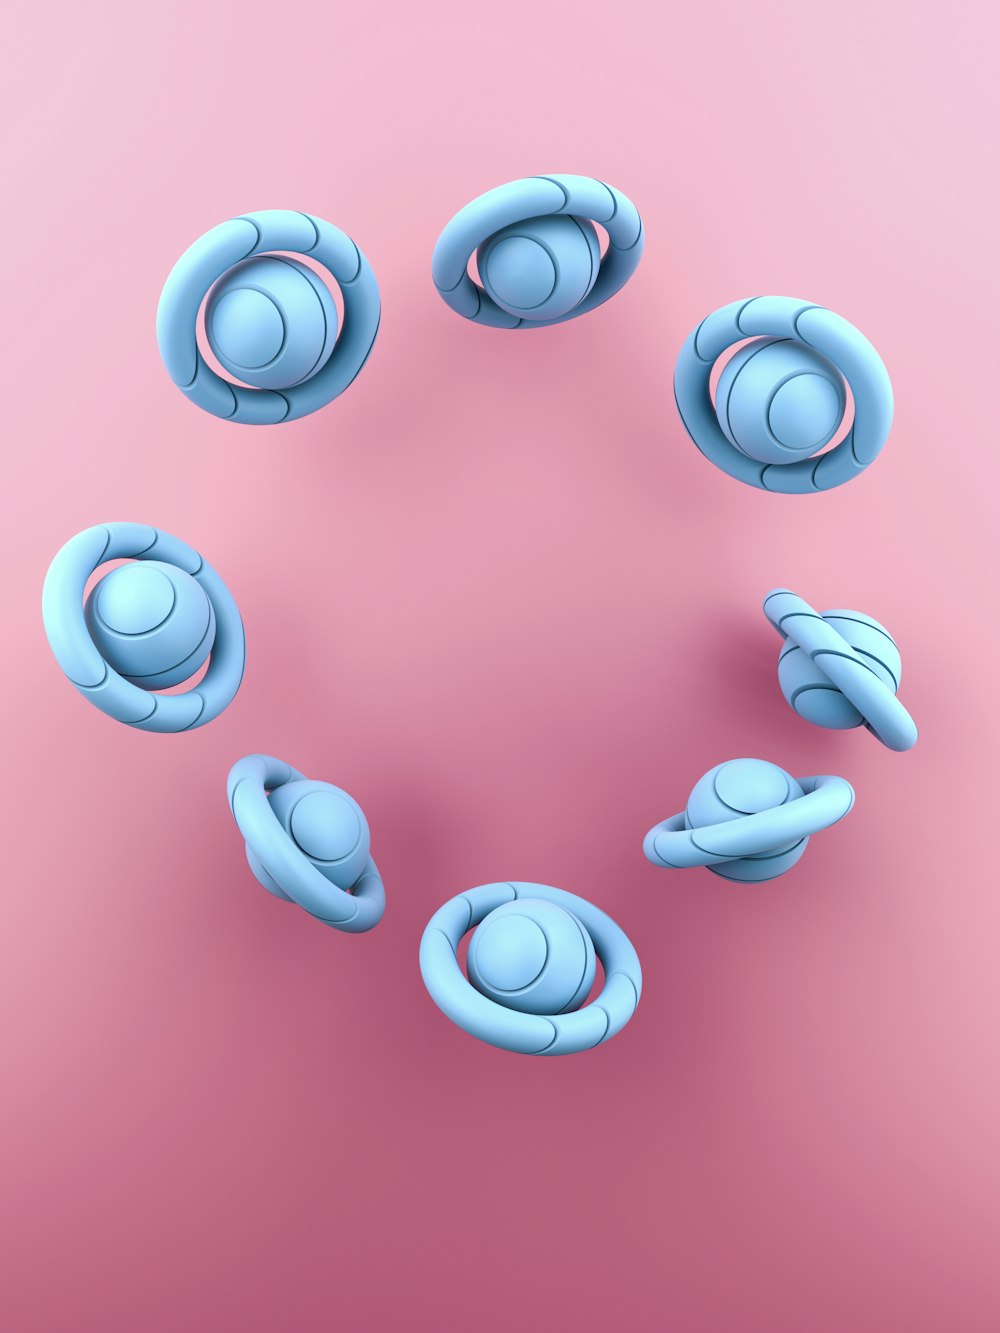 a group of blue objects on a pink background